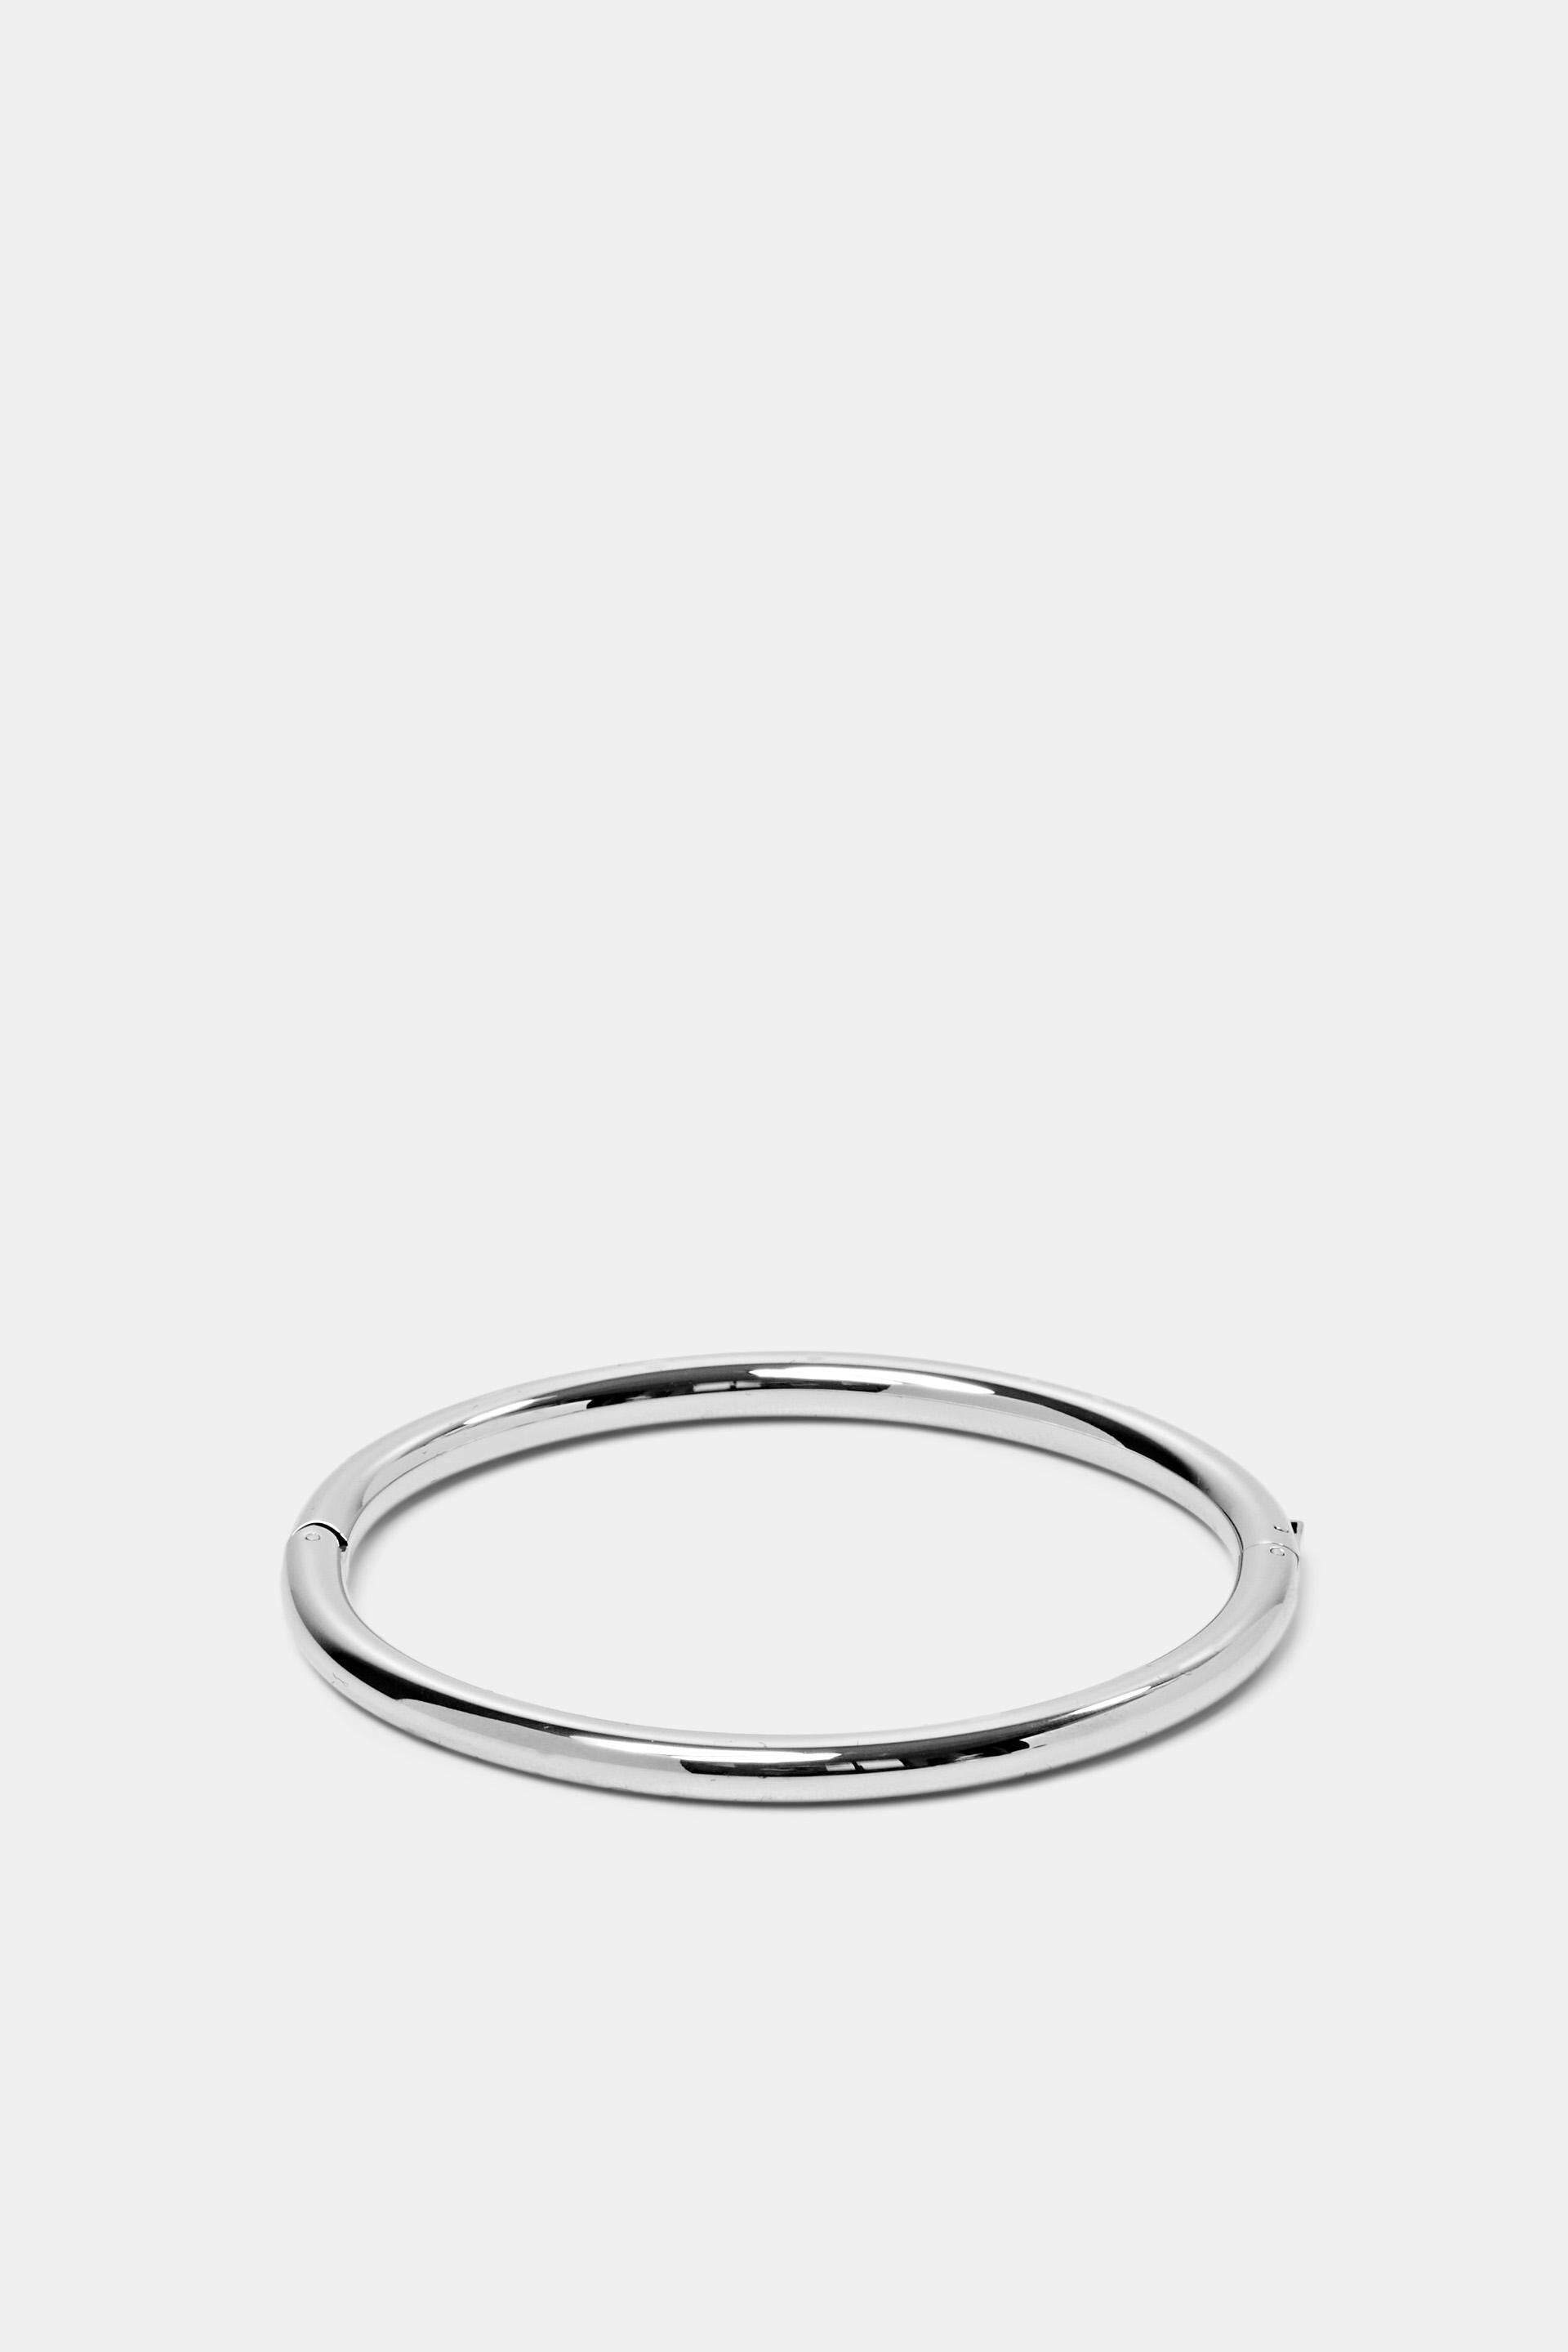 Esprit stainless steel made of Bangle